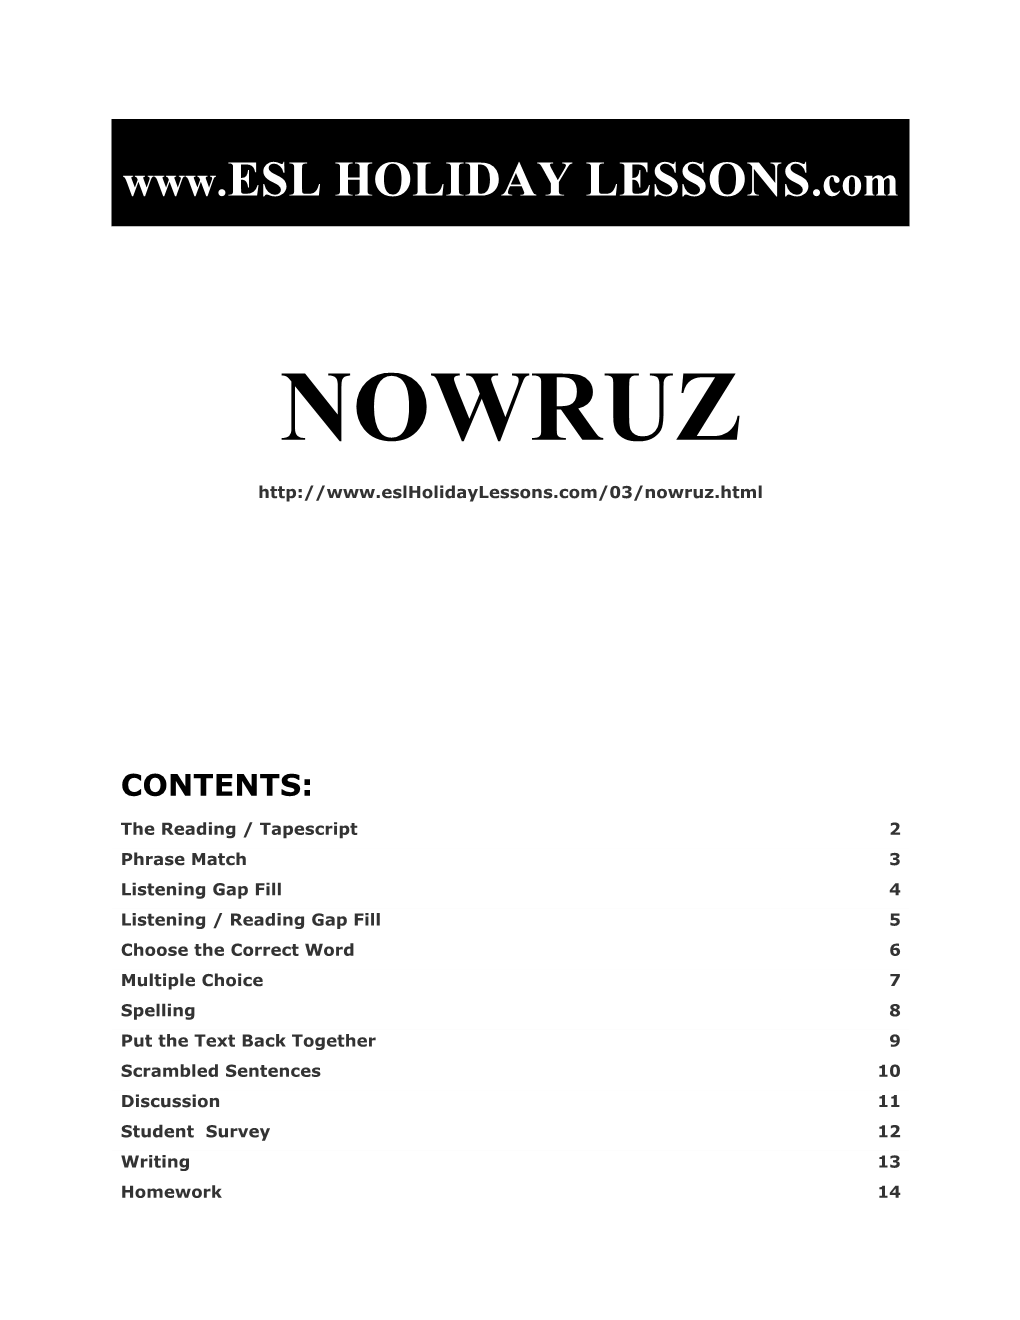 Holiday Lessons - Nowruz